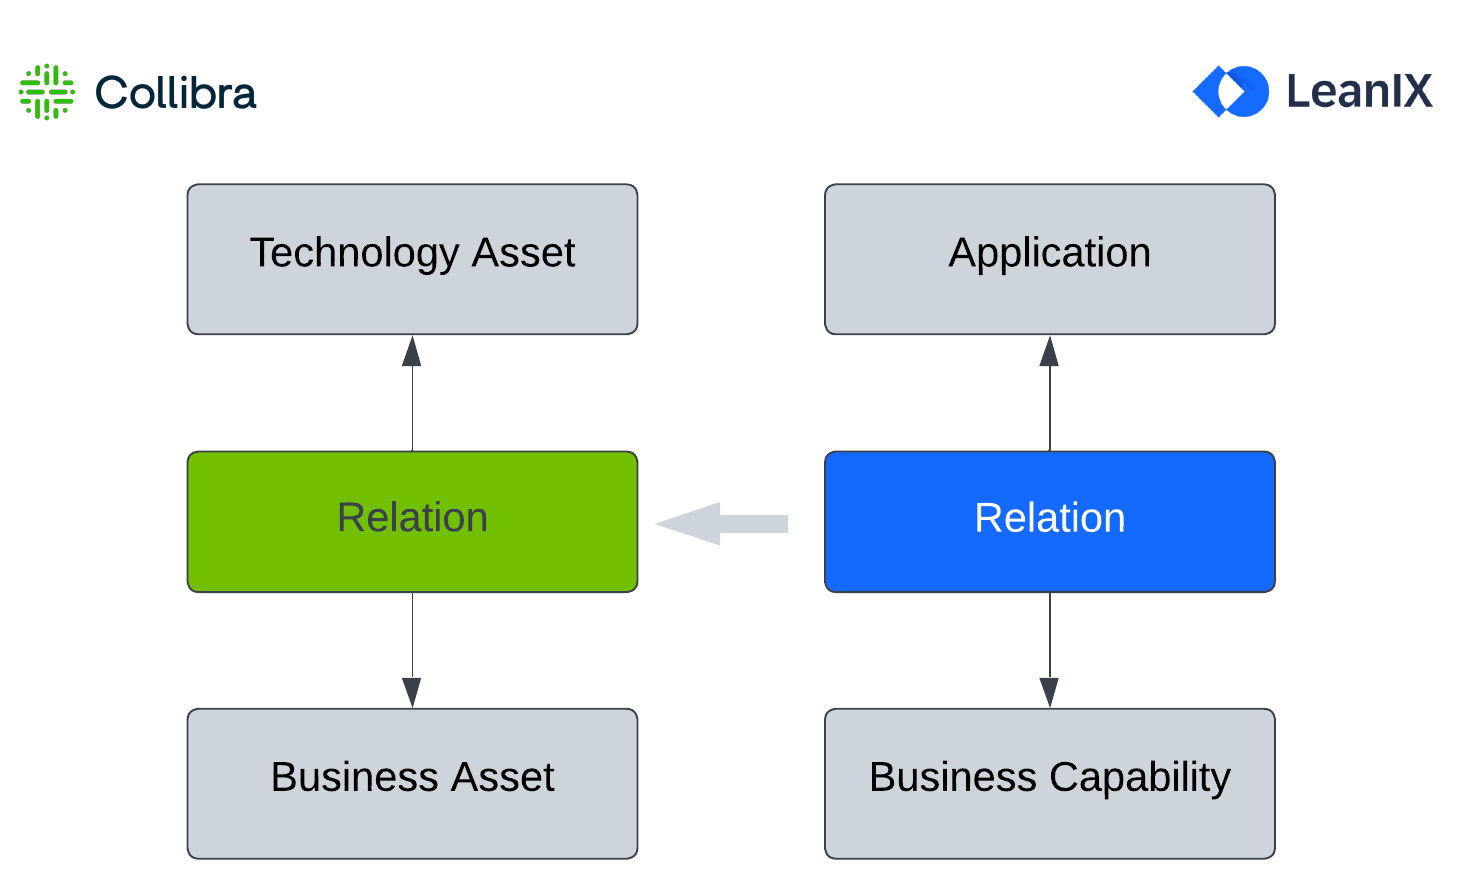 Mapping of Relation Between Application and Business Capability